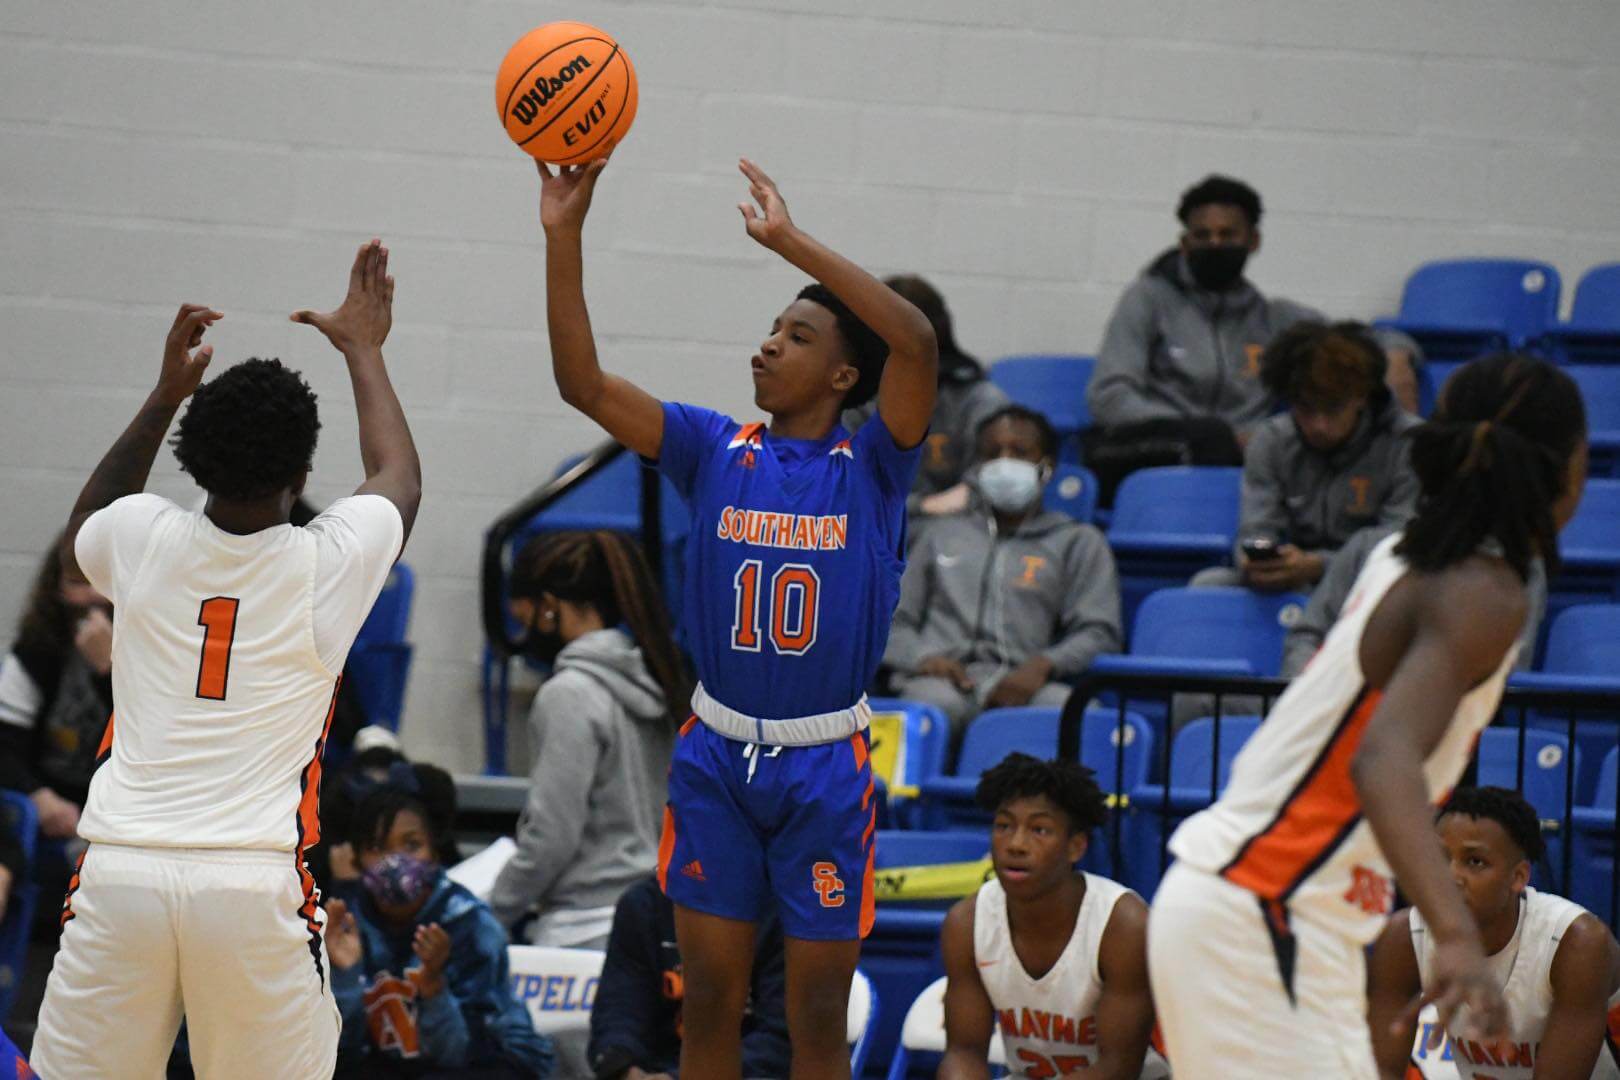 Southaven uses hot start, balanced attack to pick up win over Wayne County